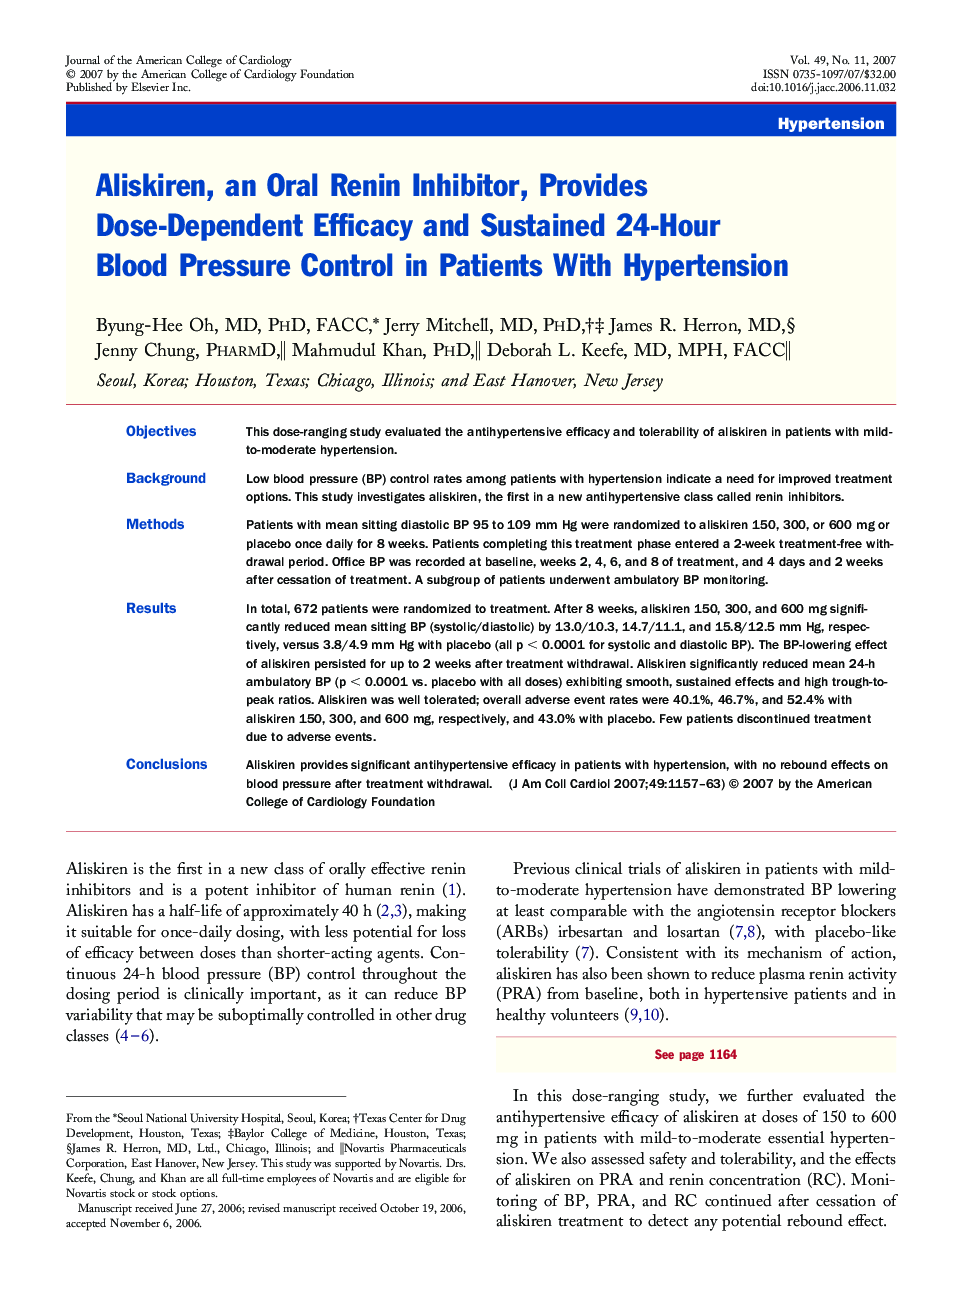 Aliskiren, an Oral Renin Inhibitor, Provides Dose-Dependent Efficacy and Sustained 24-Hour Blood Pressure Control in Patients With Hypertension 